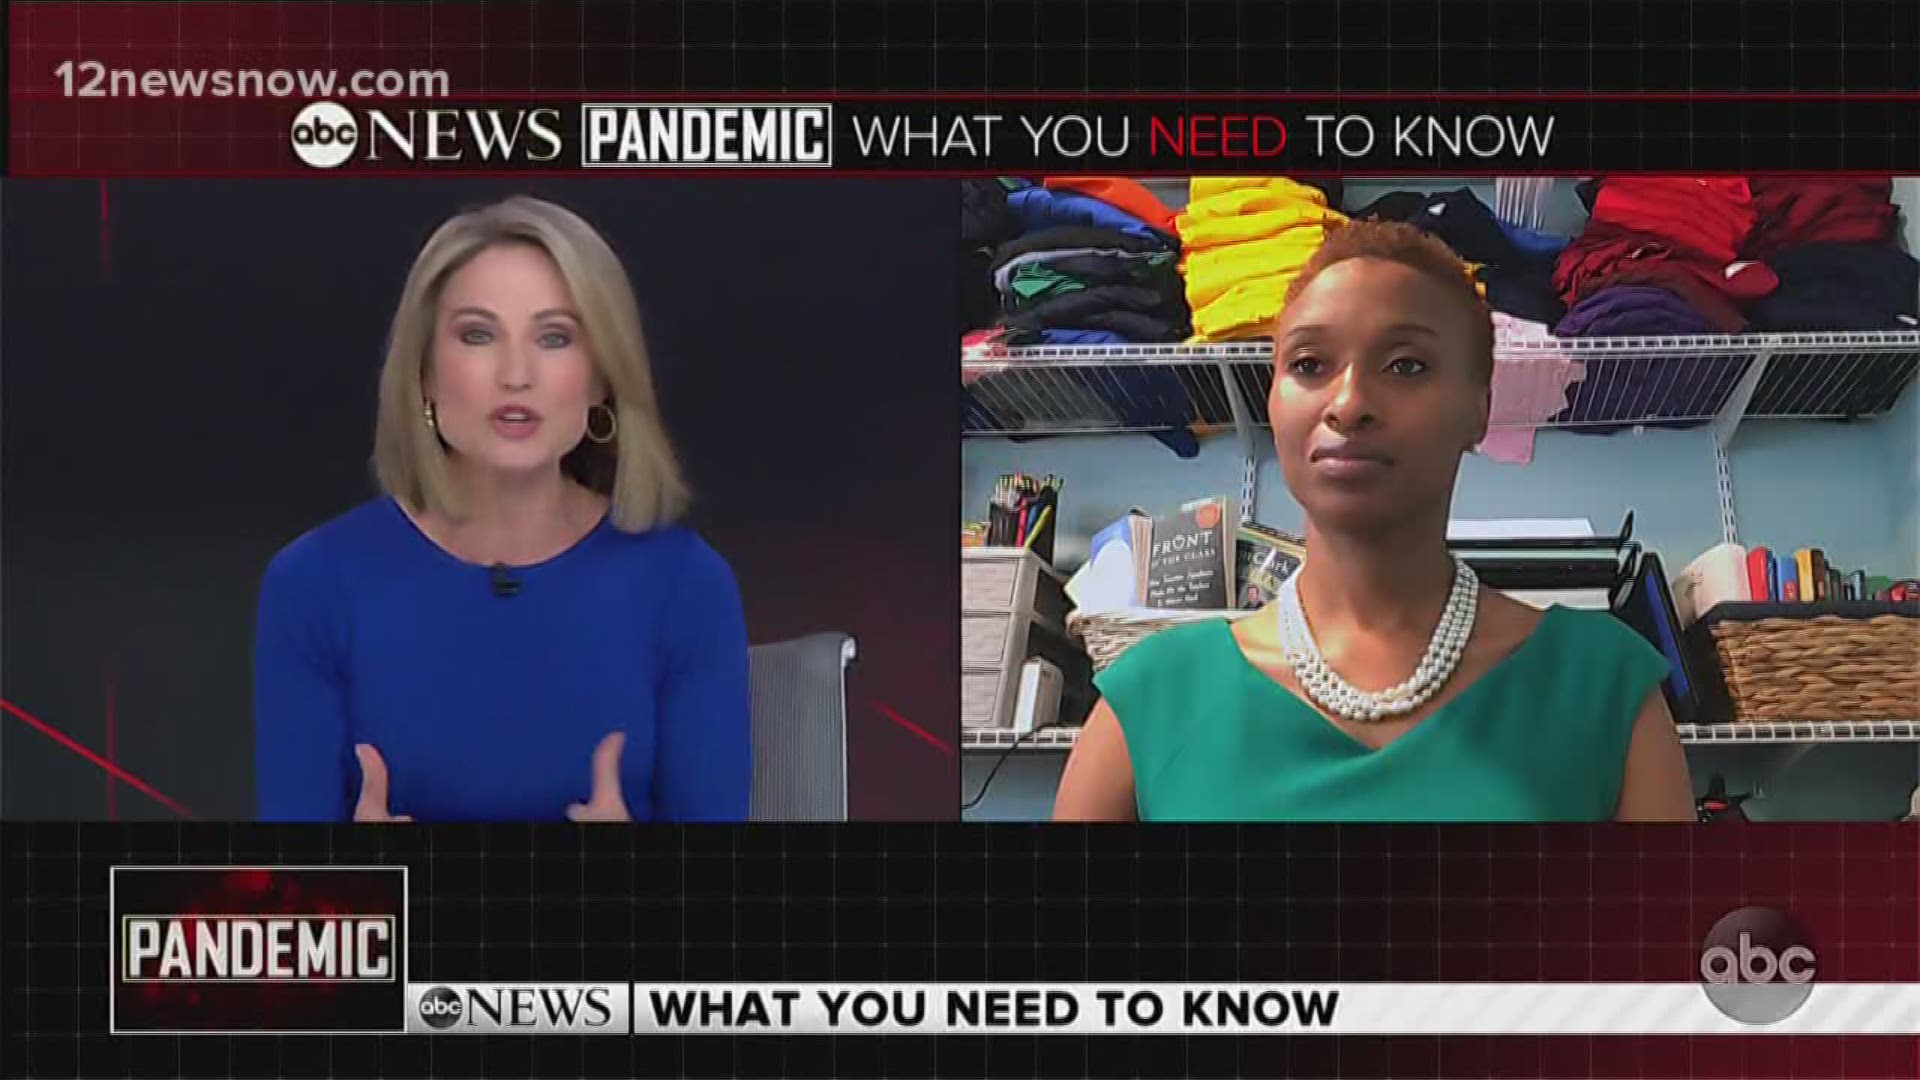 Dr. Belinda George is giving advice to families that are staying in during the pandemic.